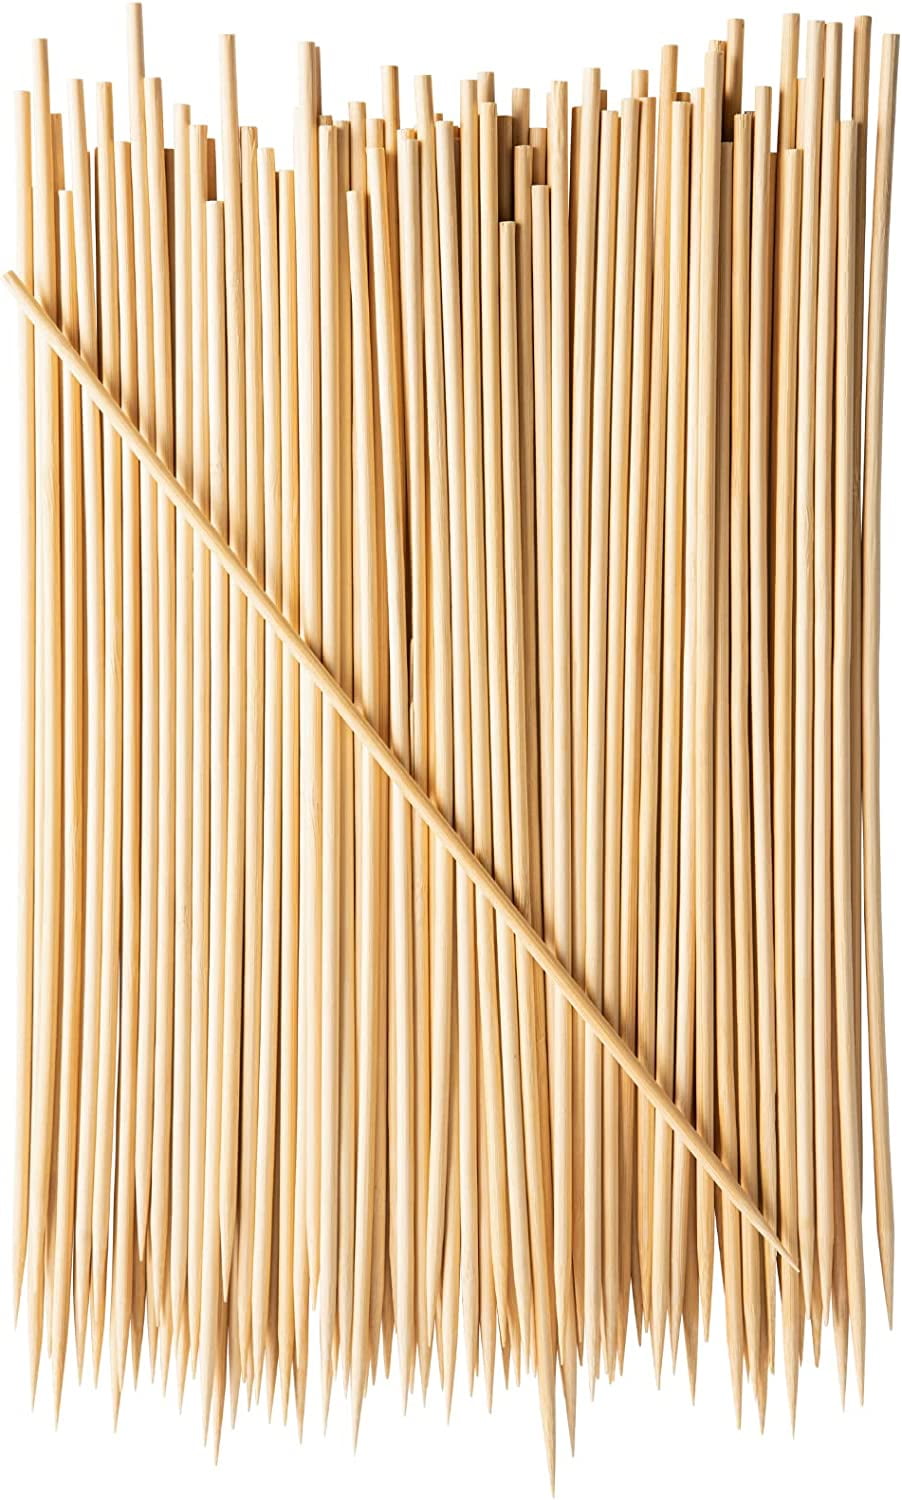 StesoSHOP Wooden Skewers Premium Quality – Set of 60 Beech Wood Skewers 12-Inch – Practical Wooden Sticks for Appetizers Fruits Kebab – Durable and